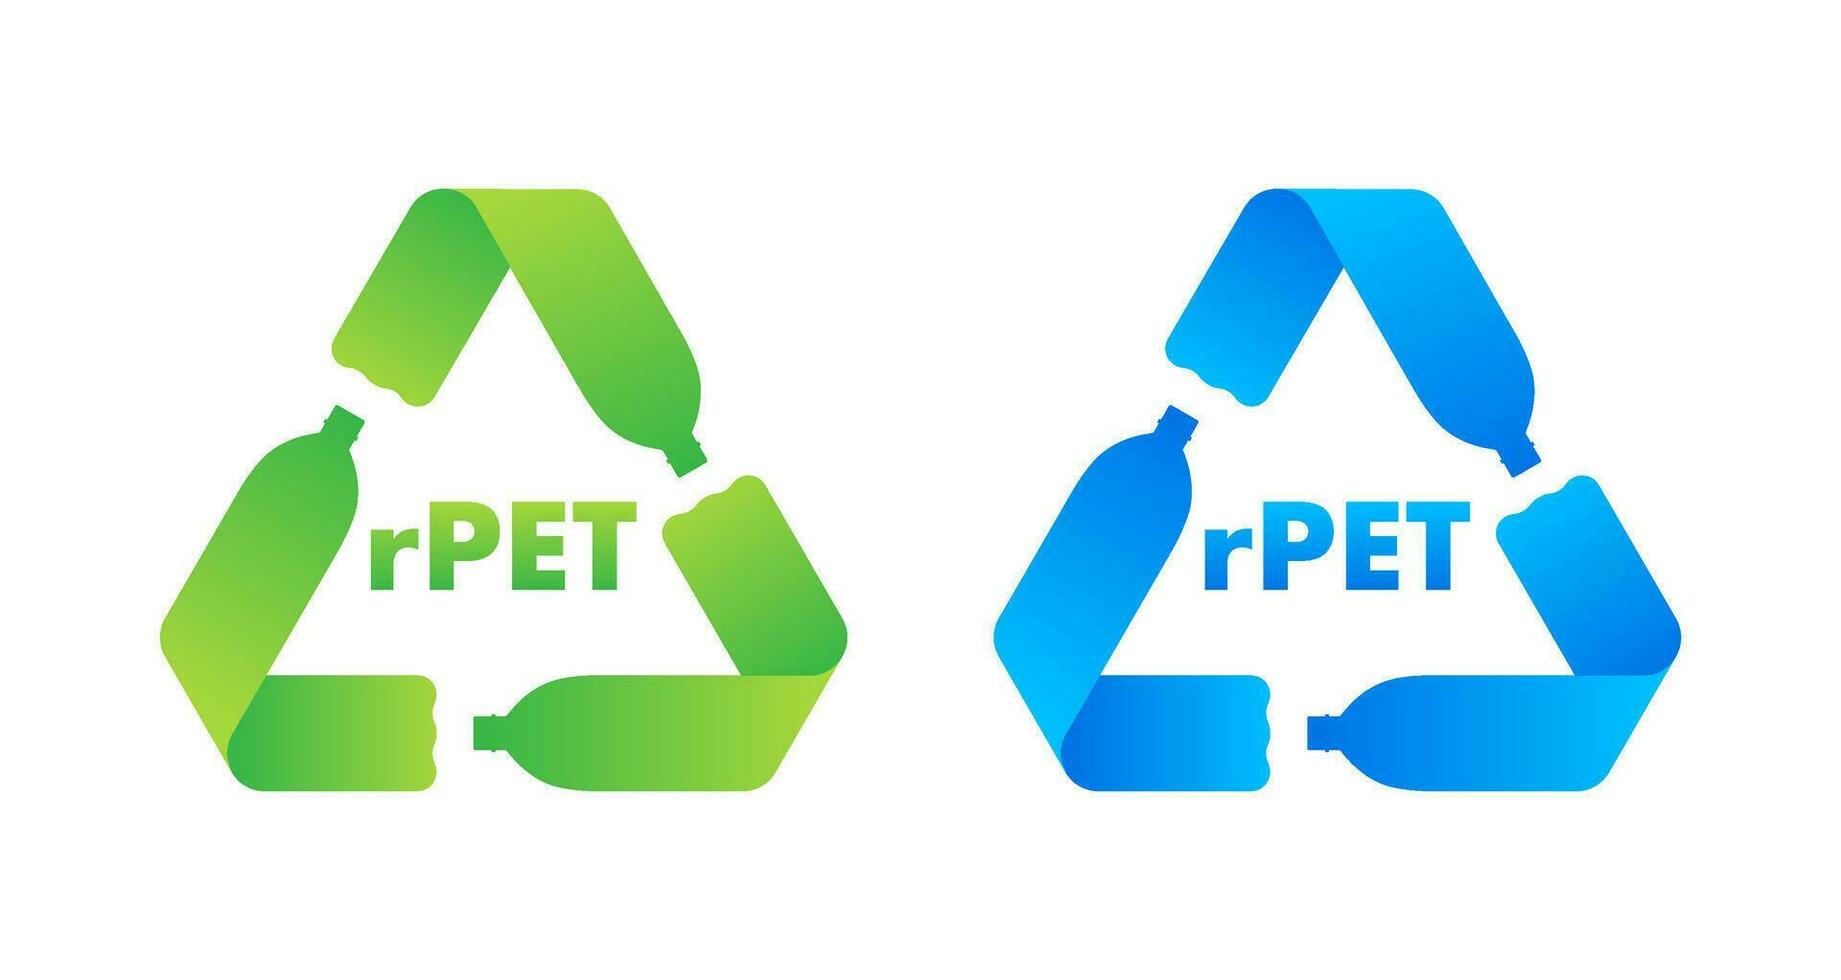 rPet standard sign, label. 100 percent recycled materials and bottles. Recycled polyethylene terephthalate. Vector stock illustration